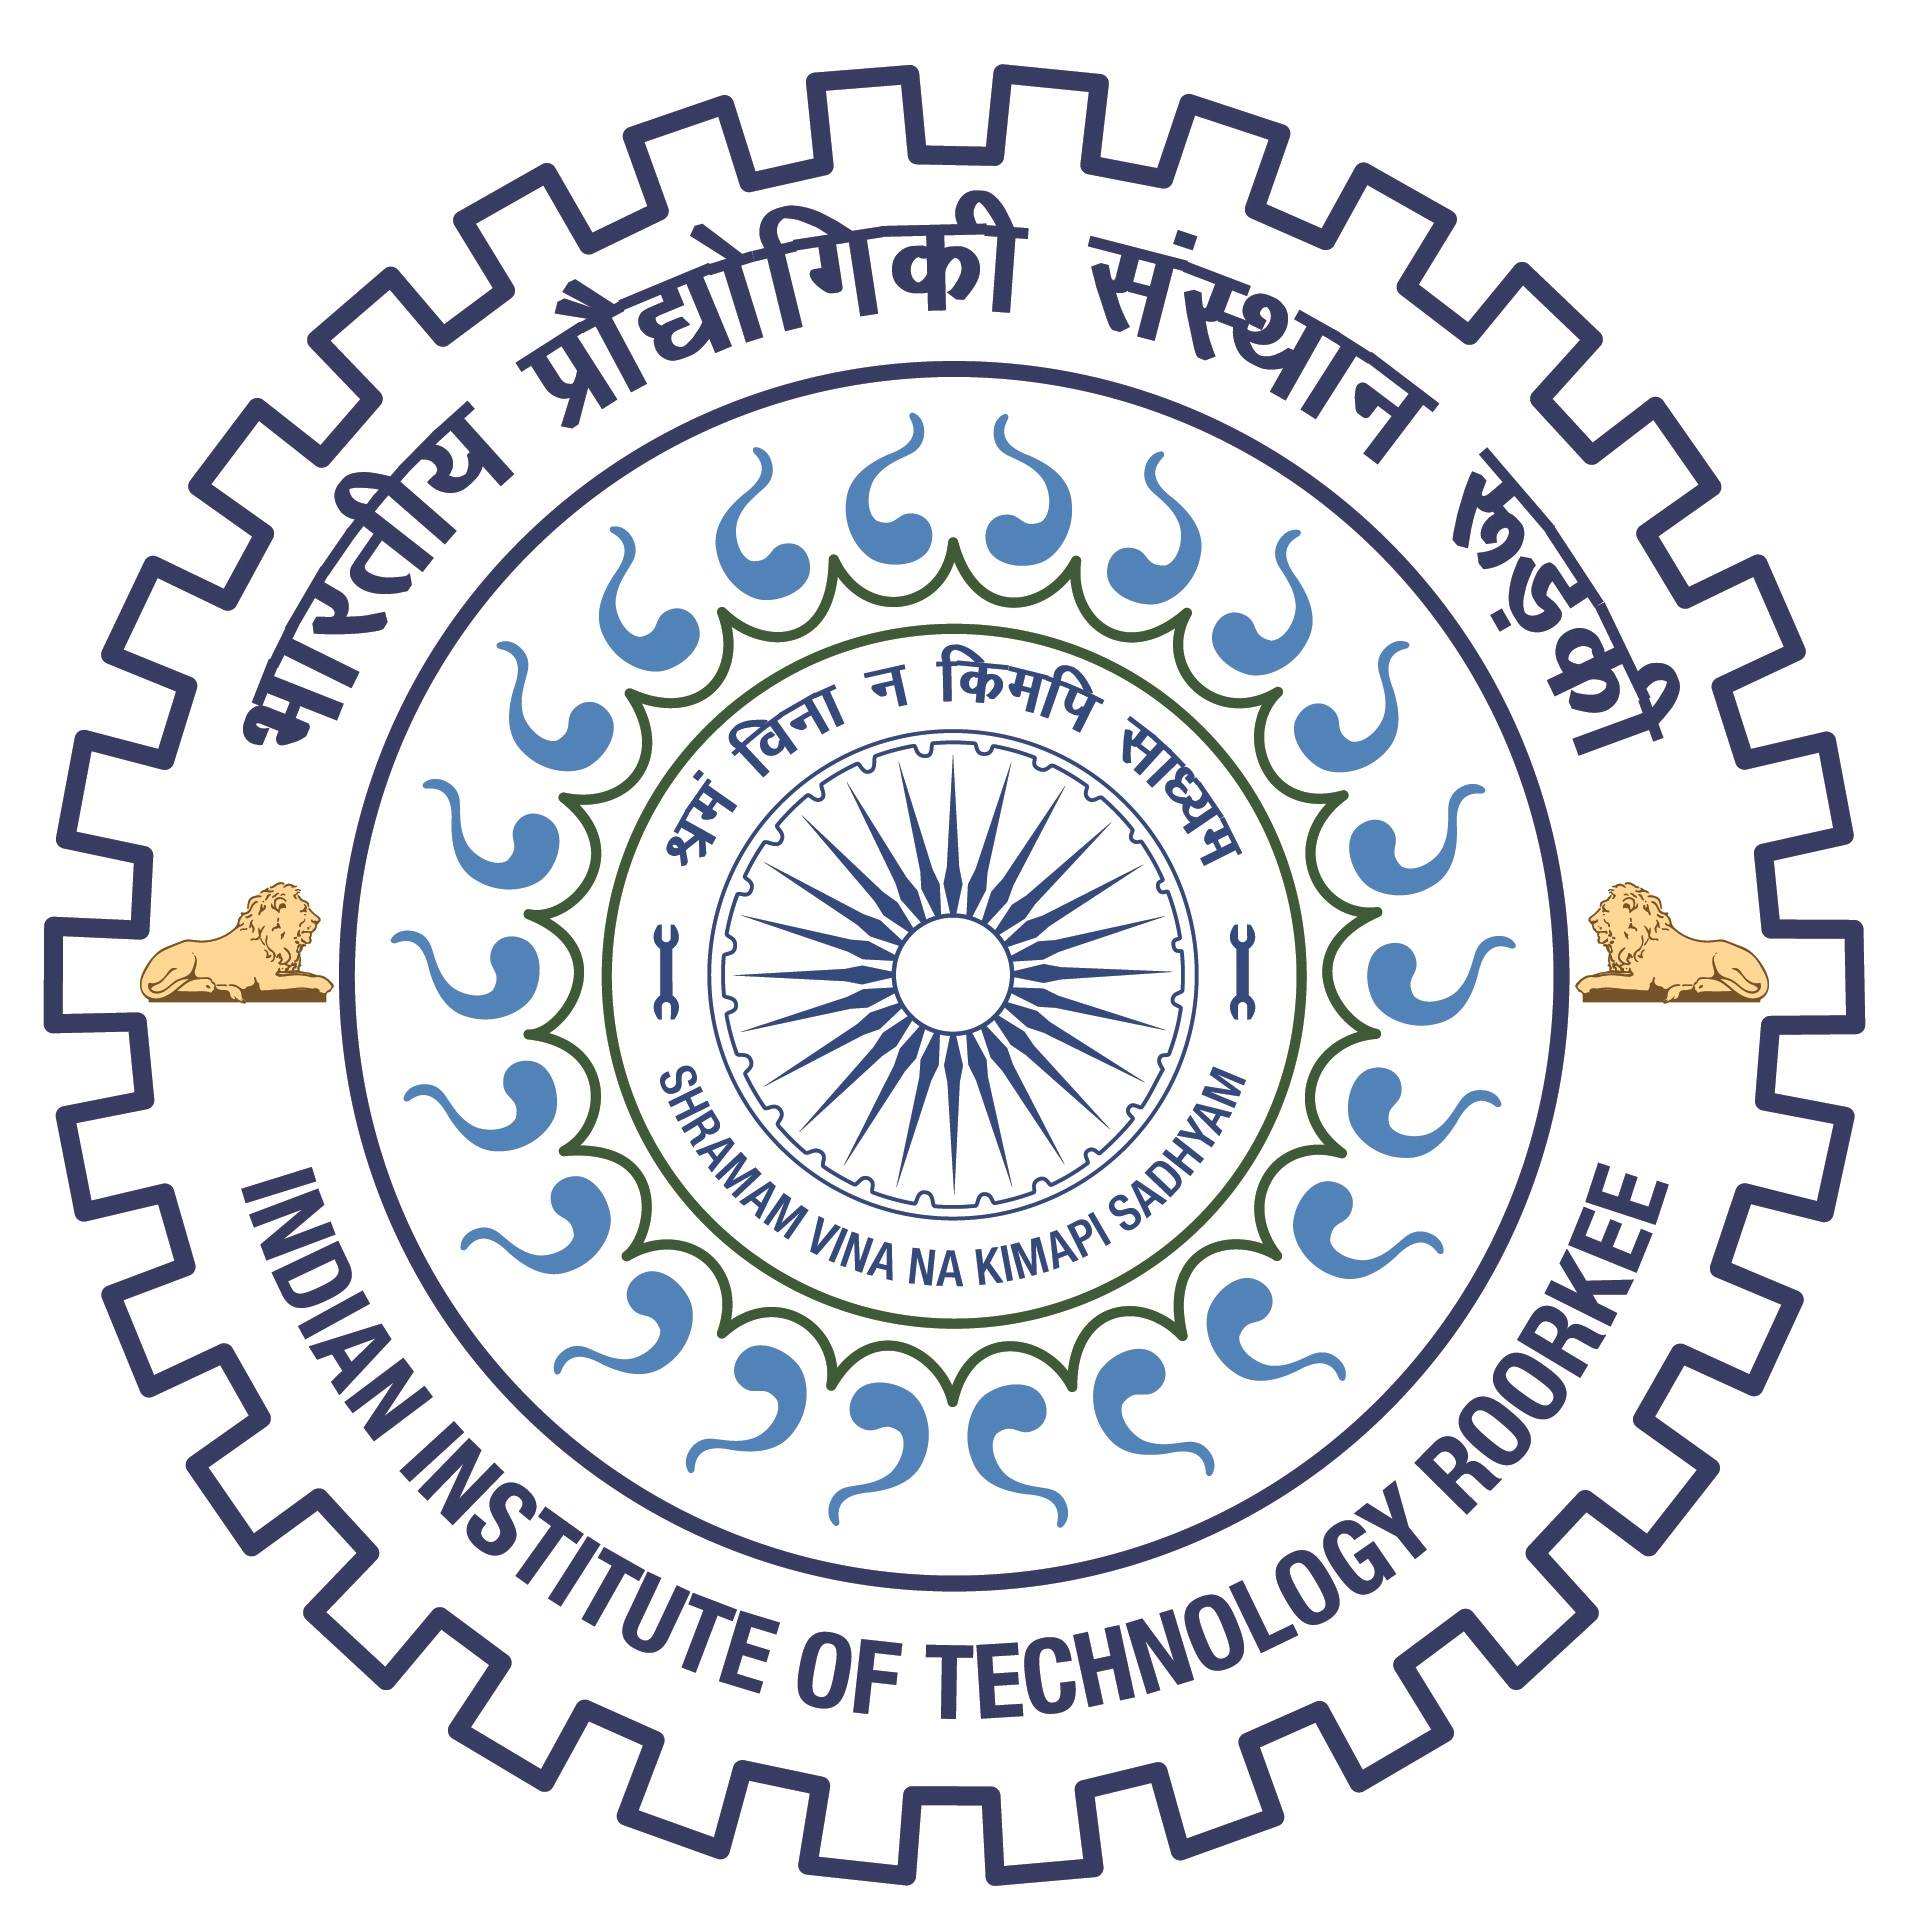 IIT Roorkee Notification 2019 – Openings for Various Project Assistant Posts